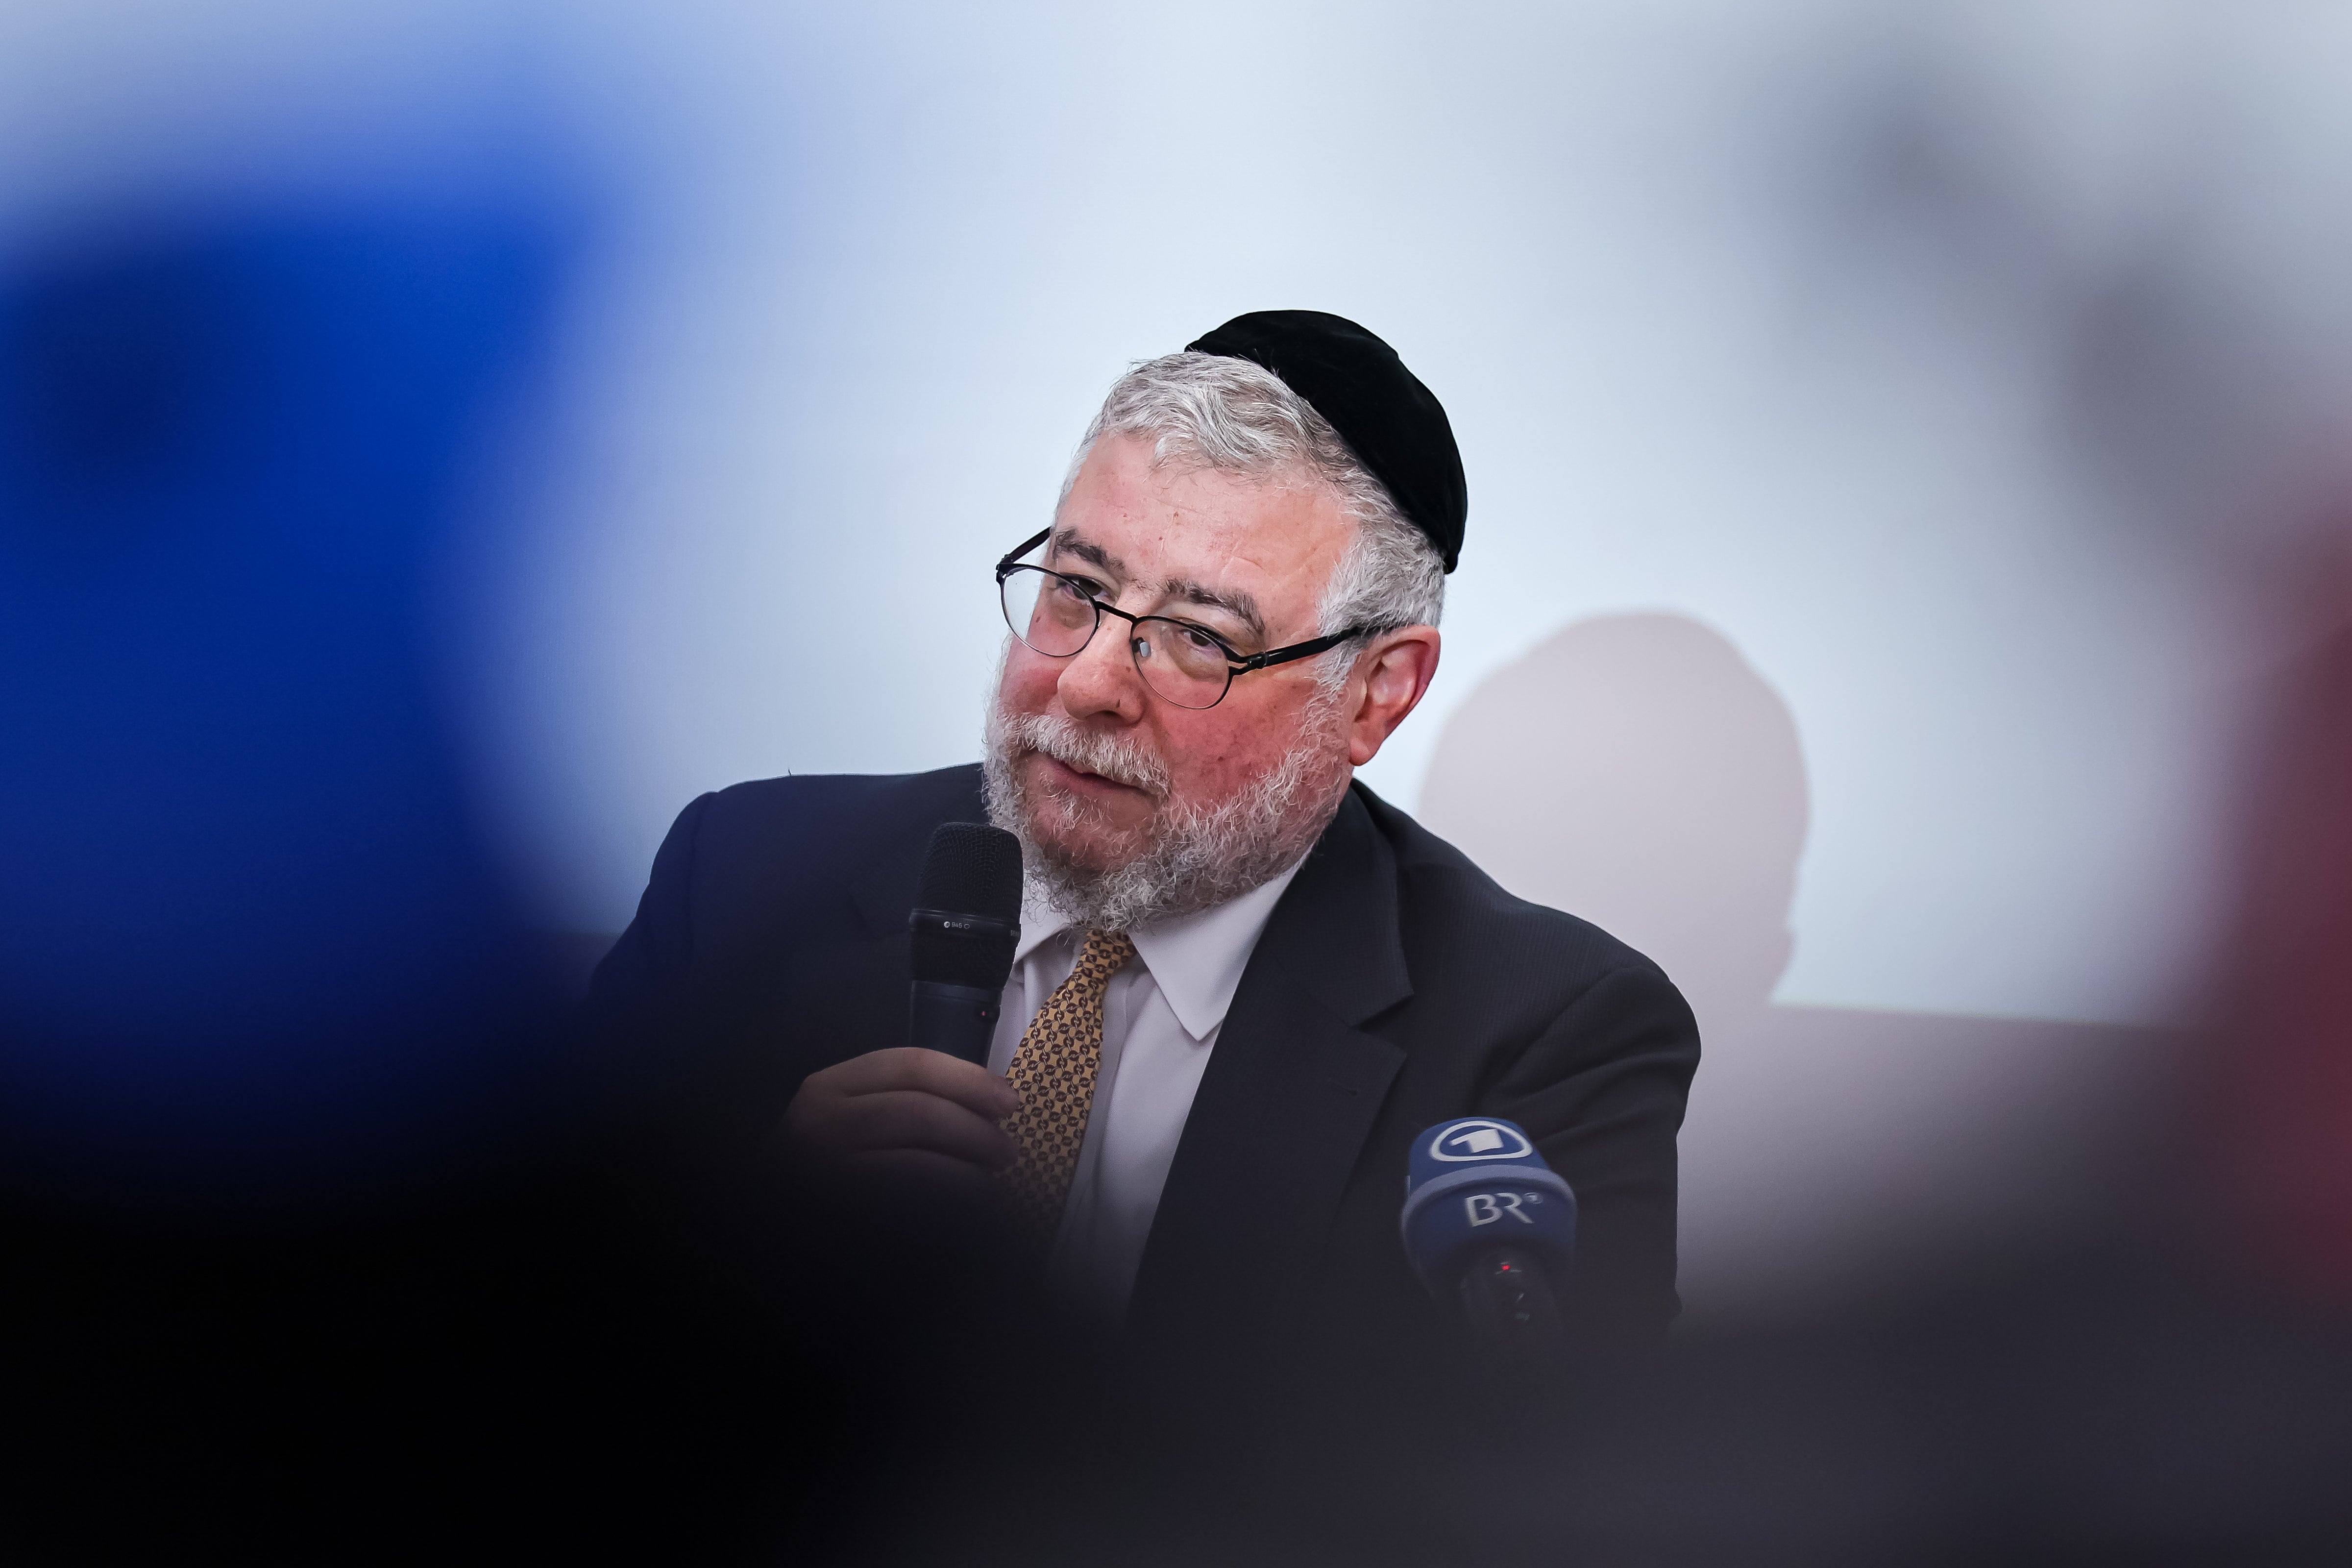 The 60-year-old Rabbi finds himself watching on as the Middle East and Europe are consumed by conflicts